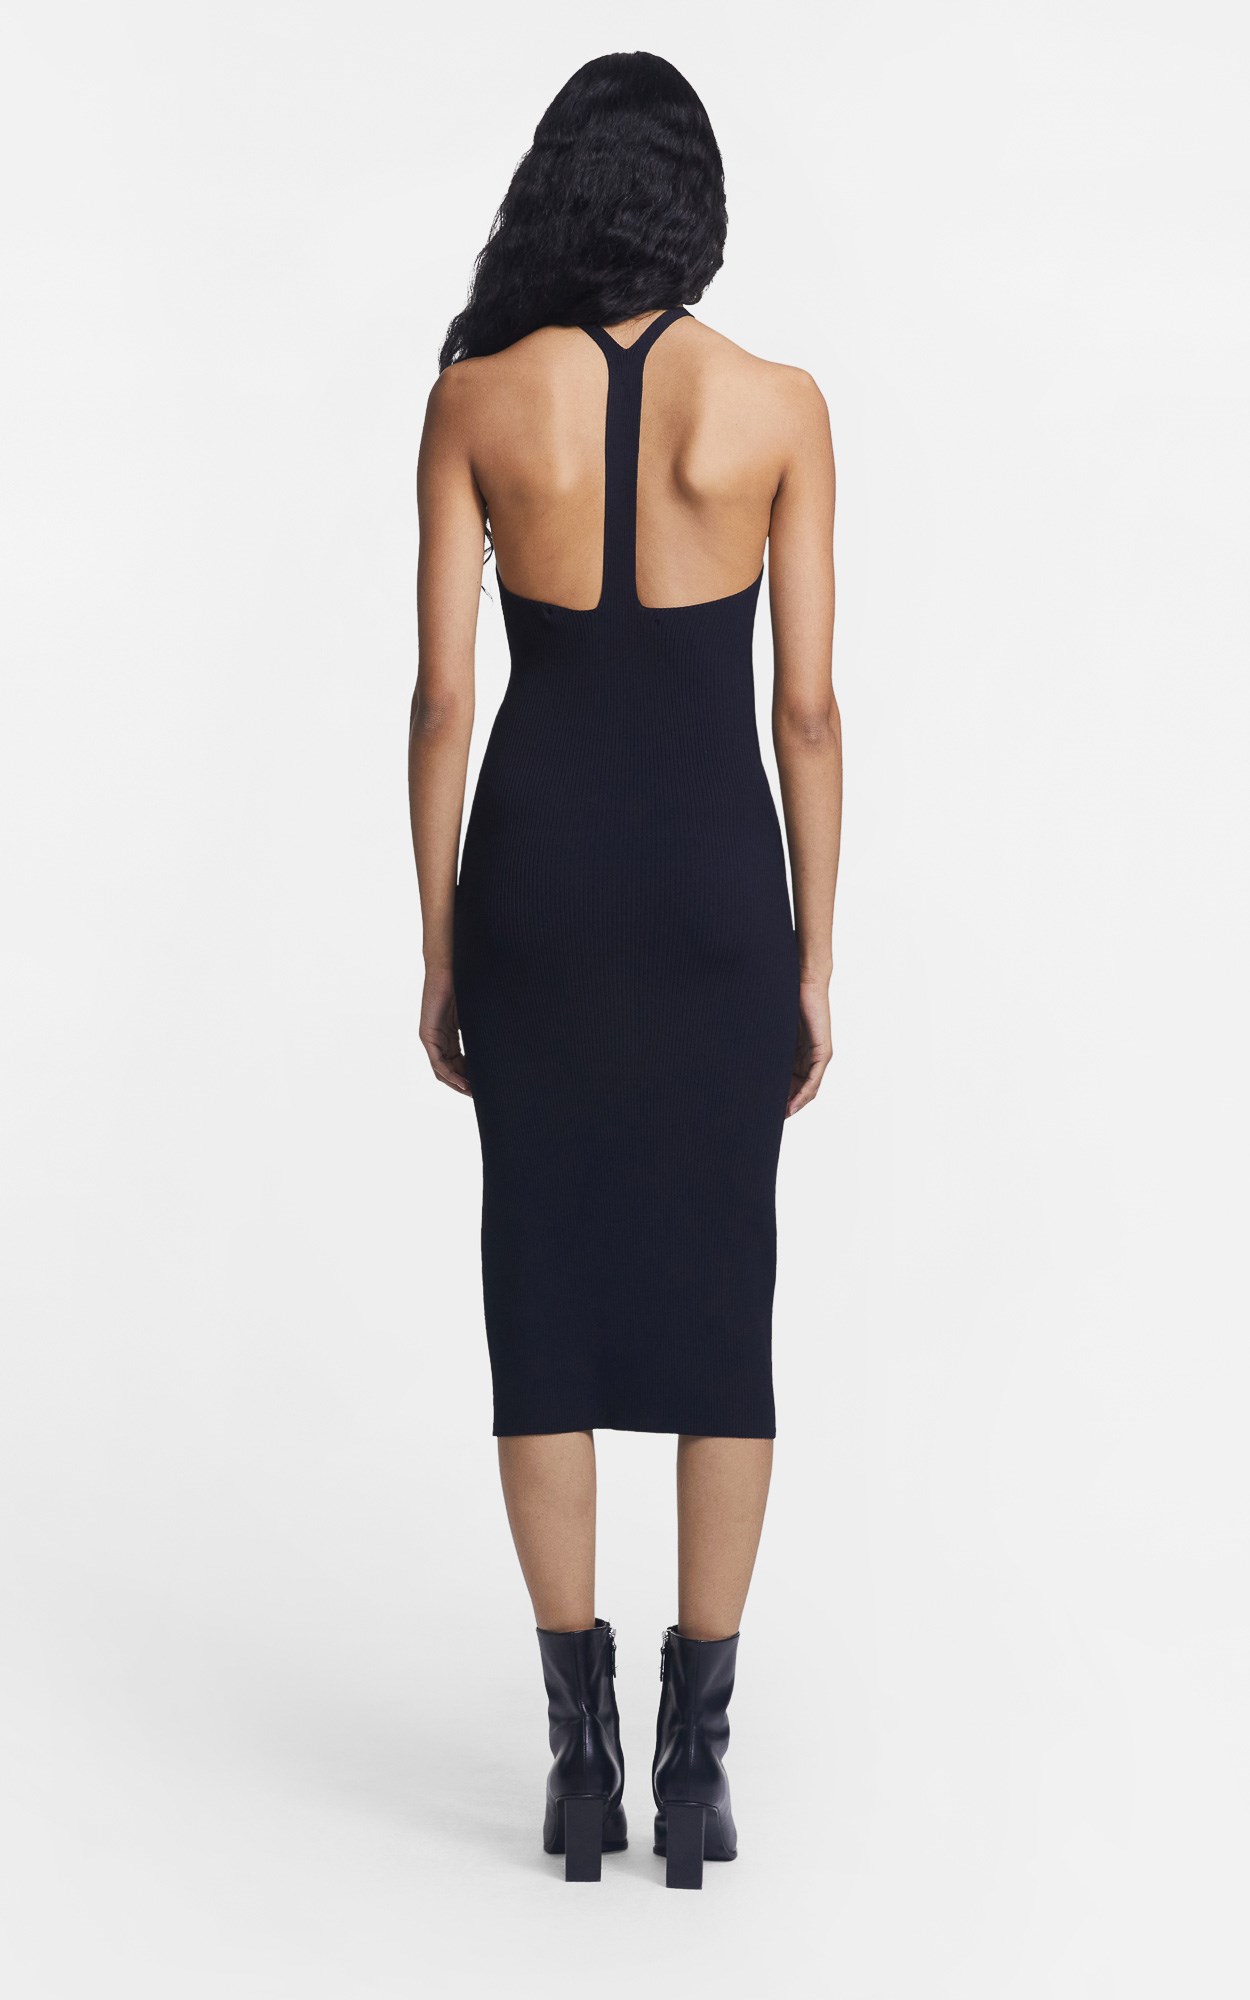 LUSTRATE FORK DRESS by Dion Lee